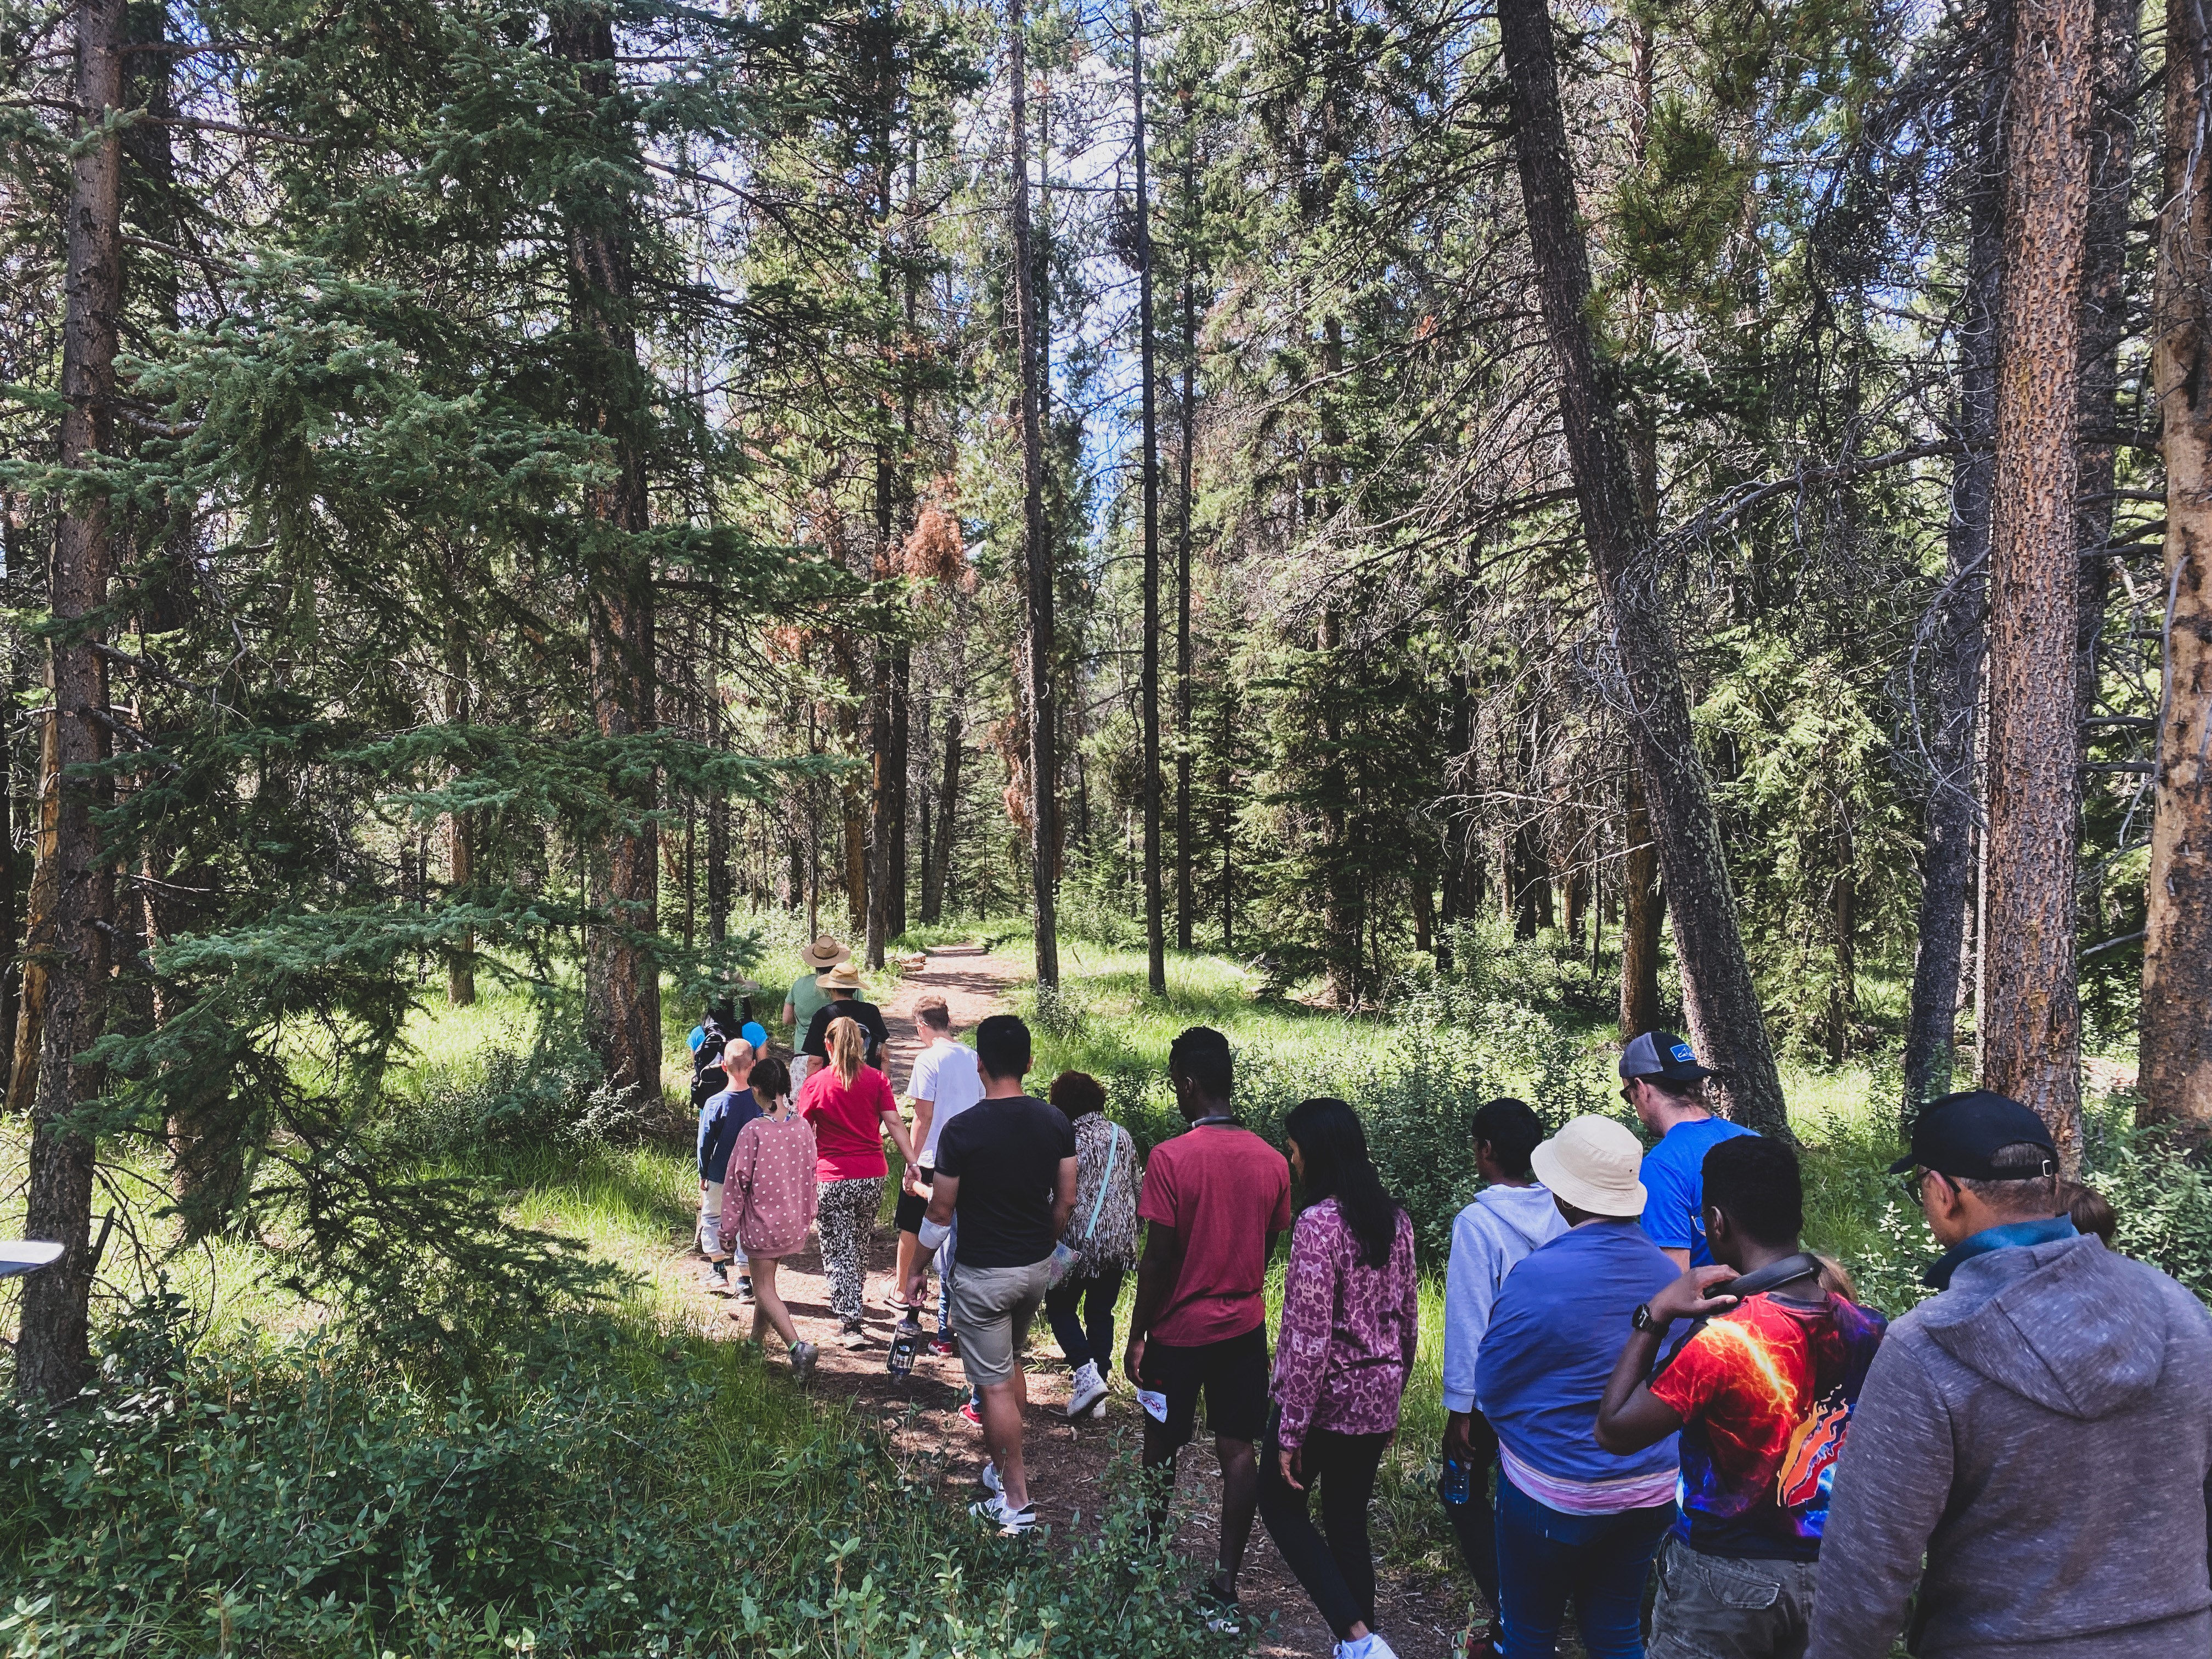 Enjoy a leisurely walk to identify local plants from a Métis perspective.